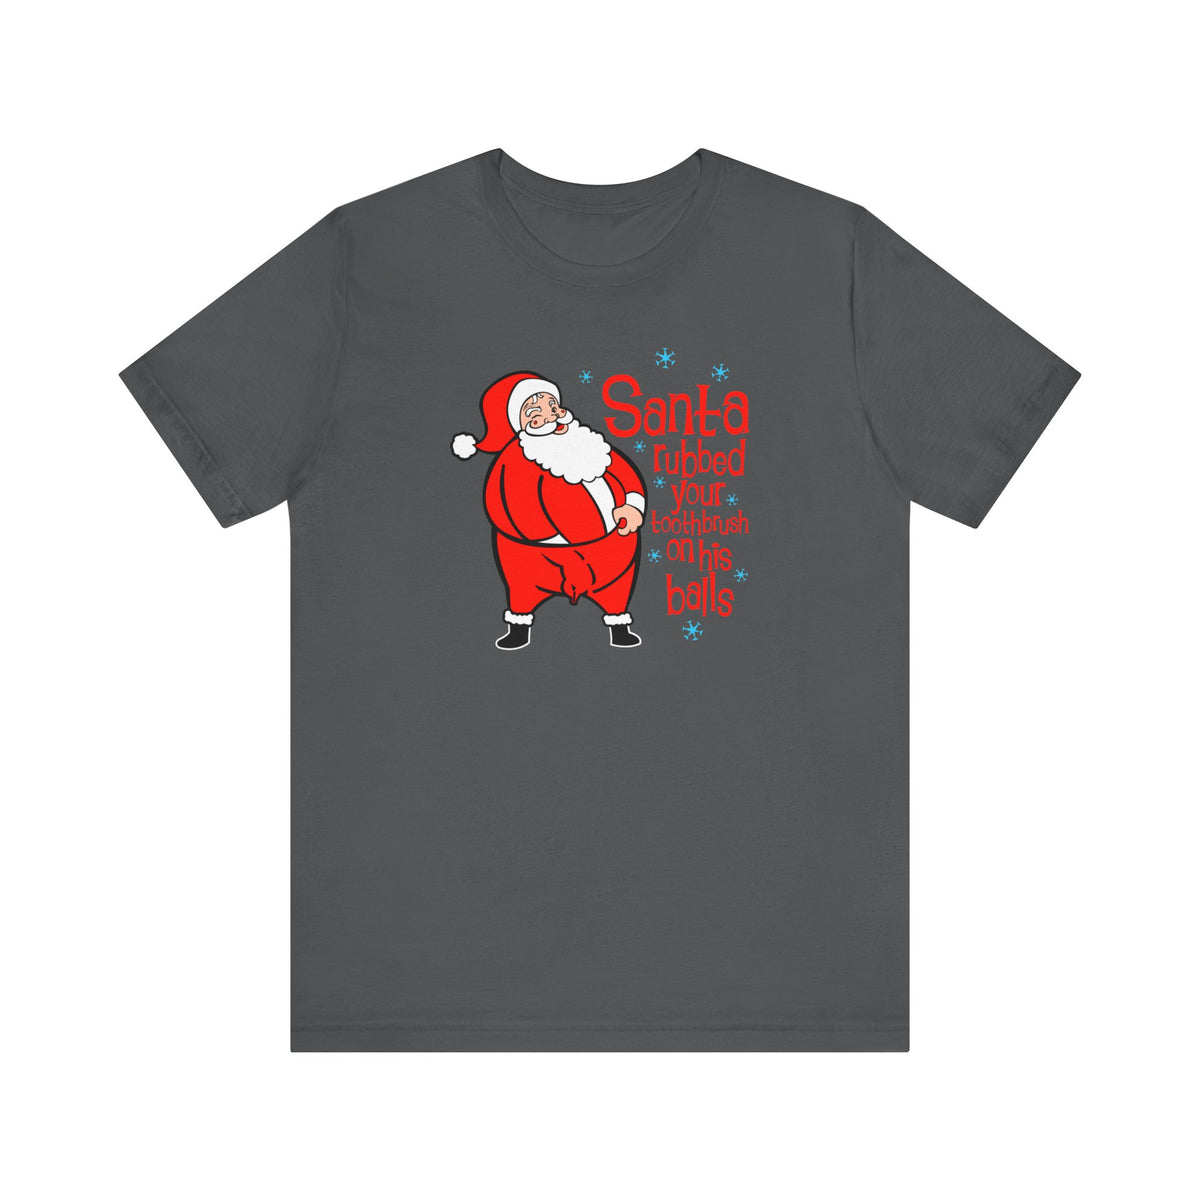 Santa Rubbed Your Toothbrush On His Balls - Men's T-Shirt